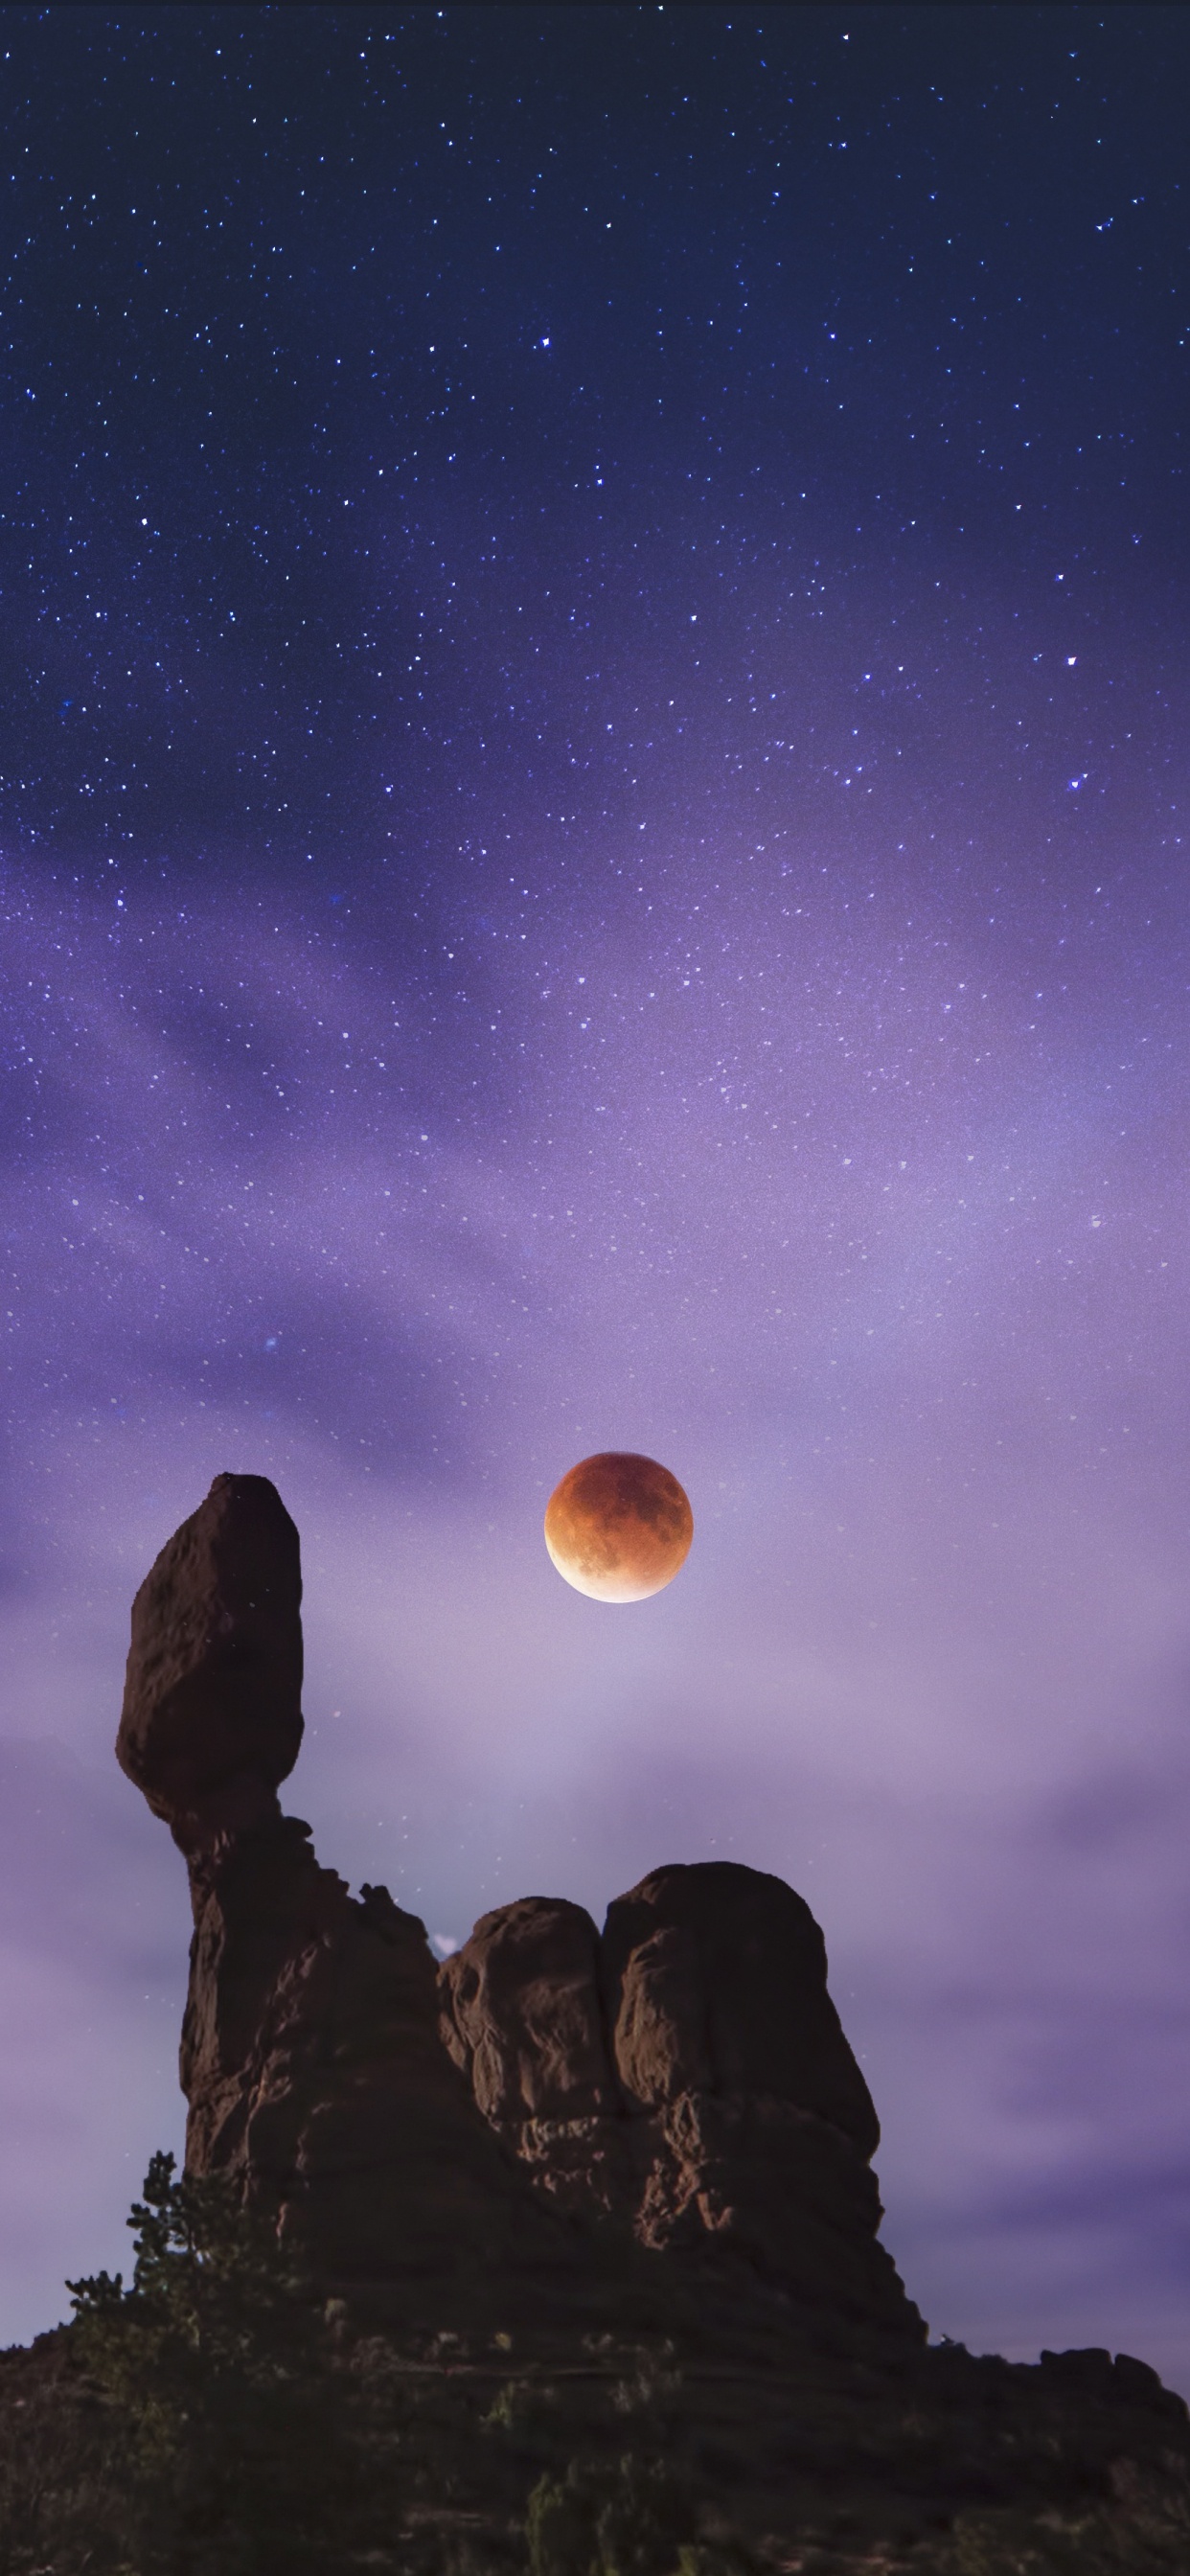 Silhouette of Man and Woman Sitting on Rock Under Starry Night. Wallpaper in 1242x2688 Resolution